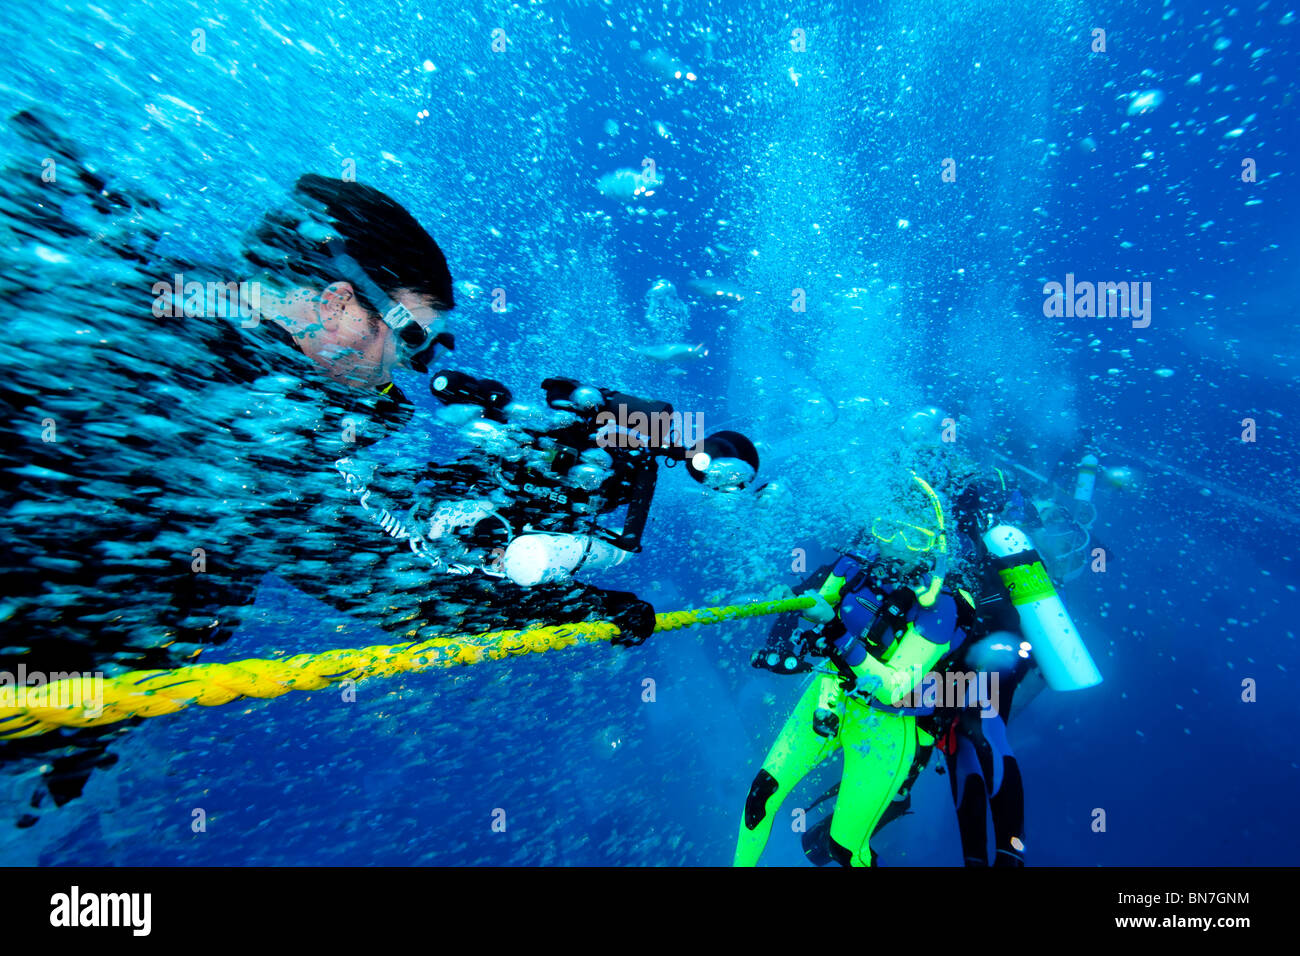 Divers hang on line during safety stop after deep dive Stock Photo